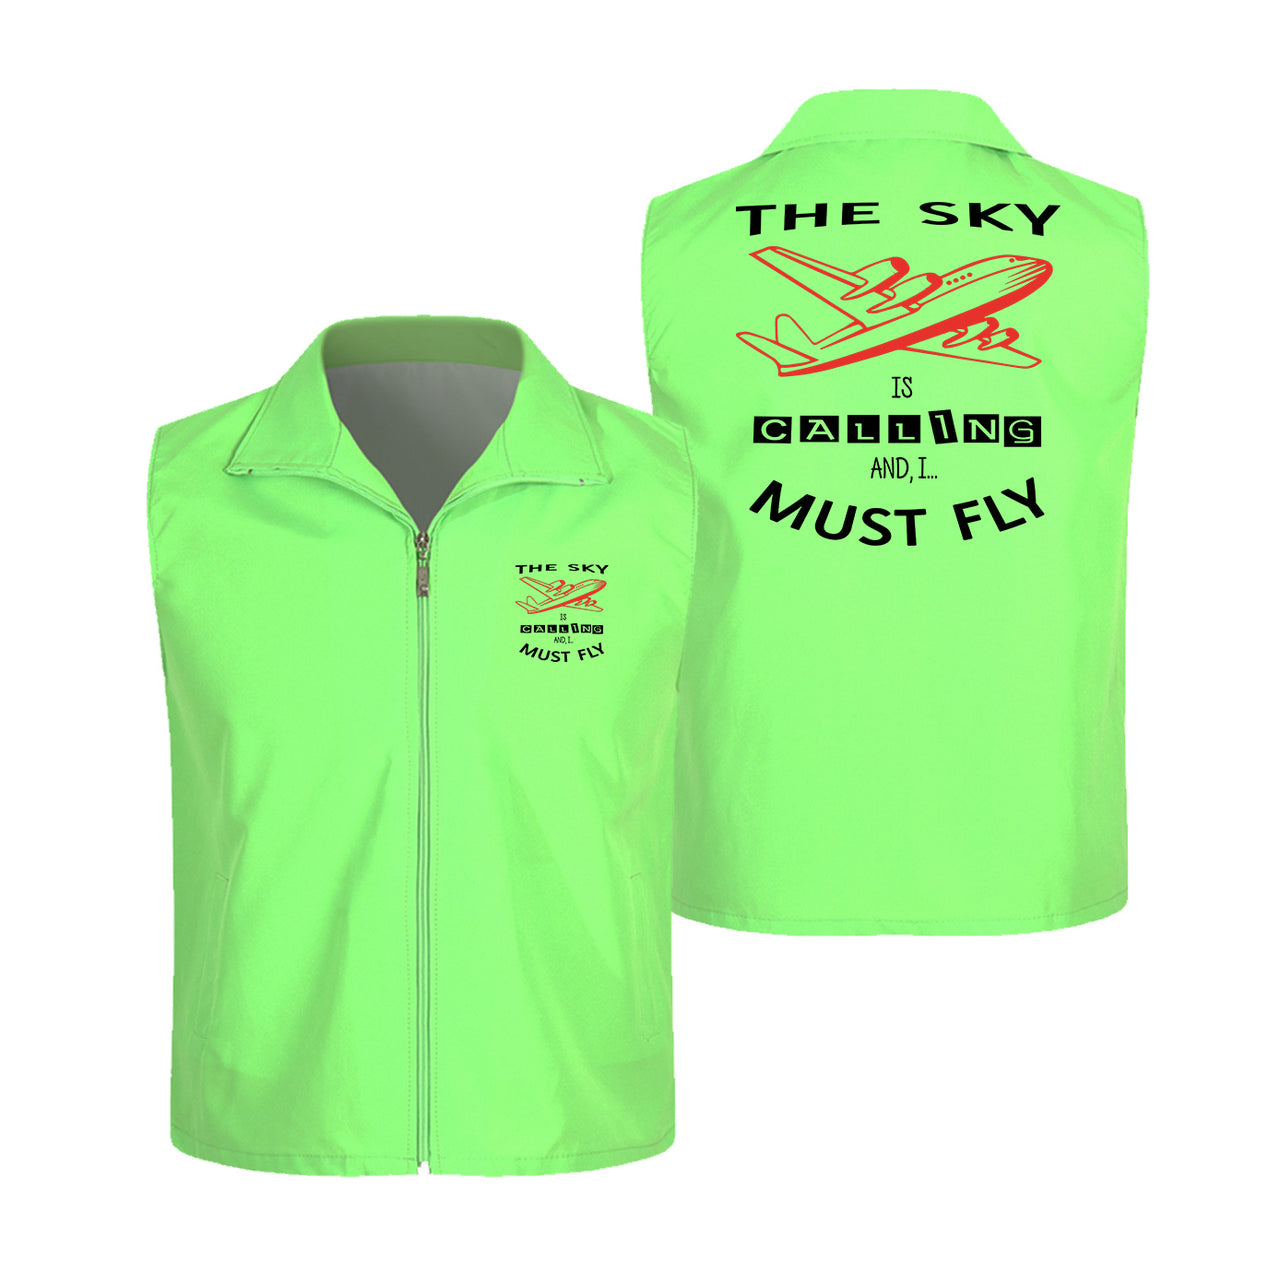 The Sky is Calling and I Must Fly Designed Thin Style Vests